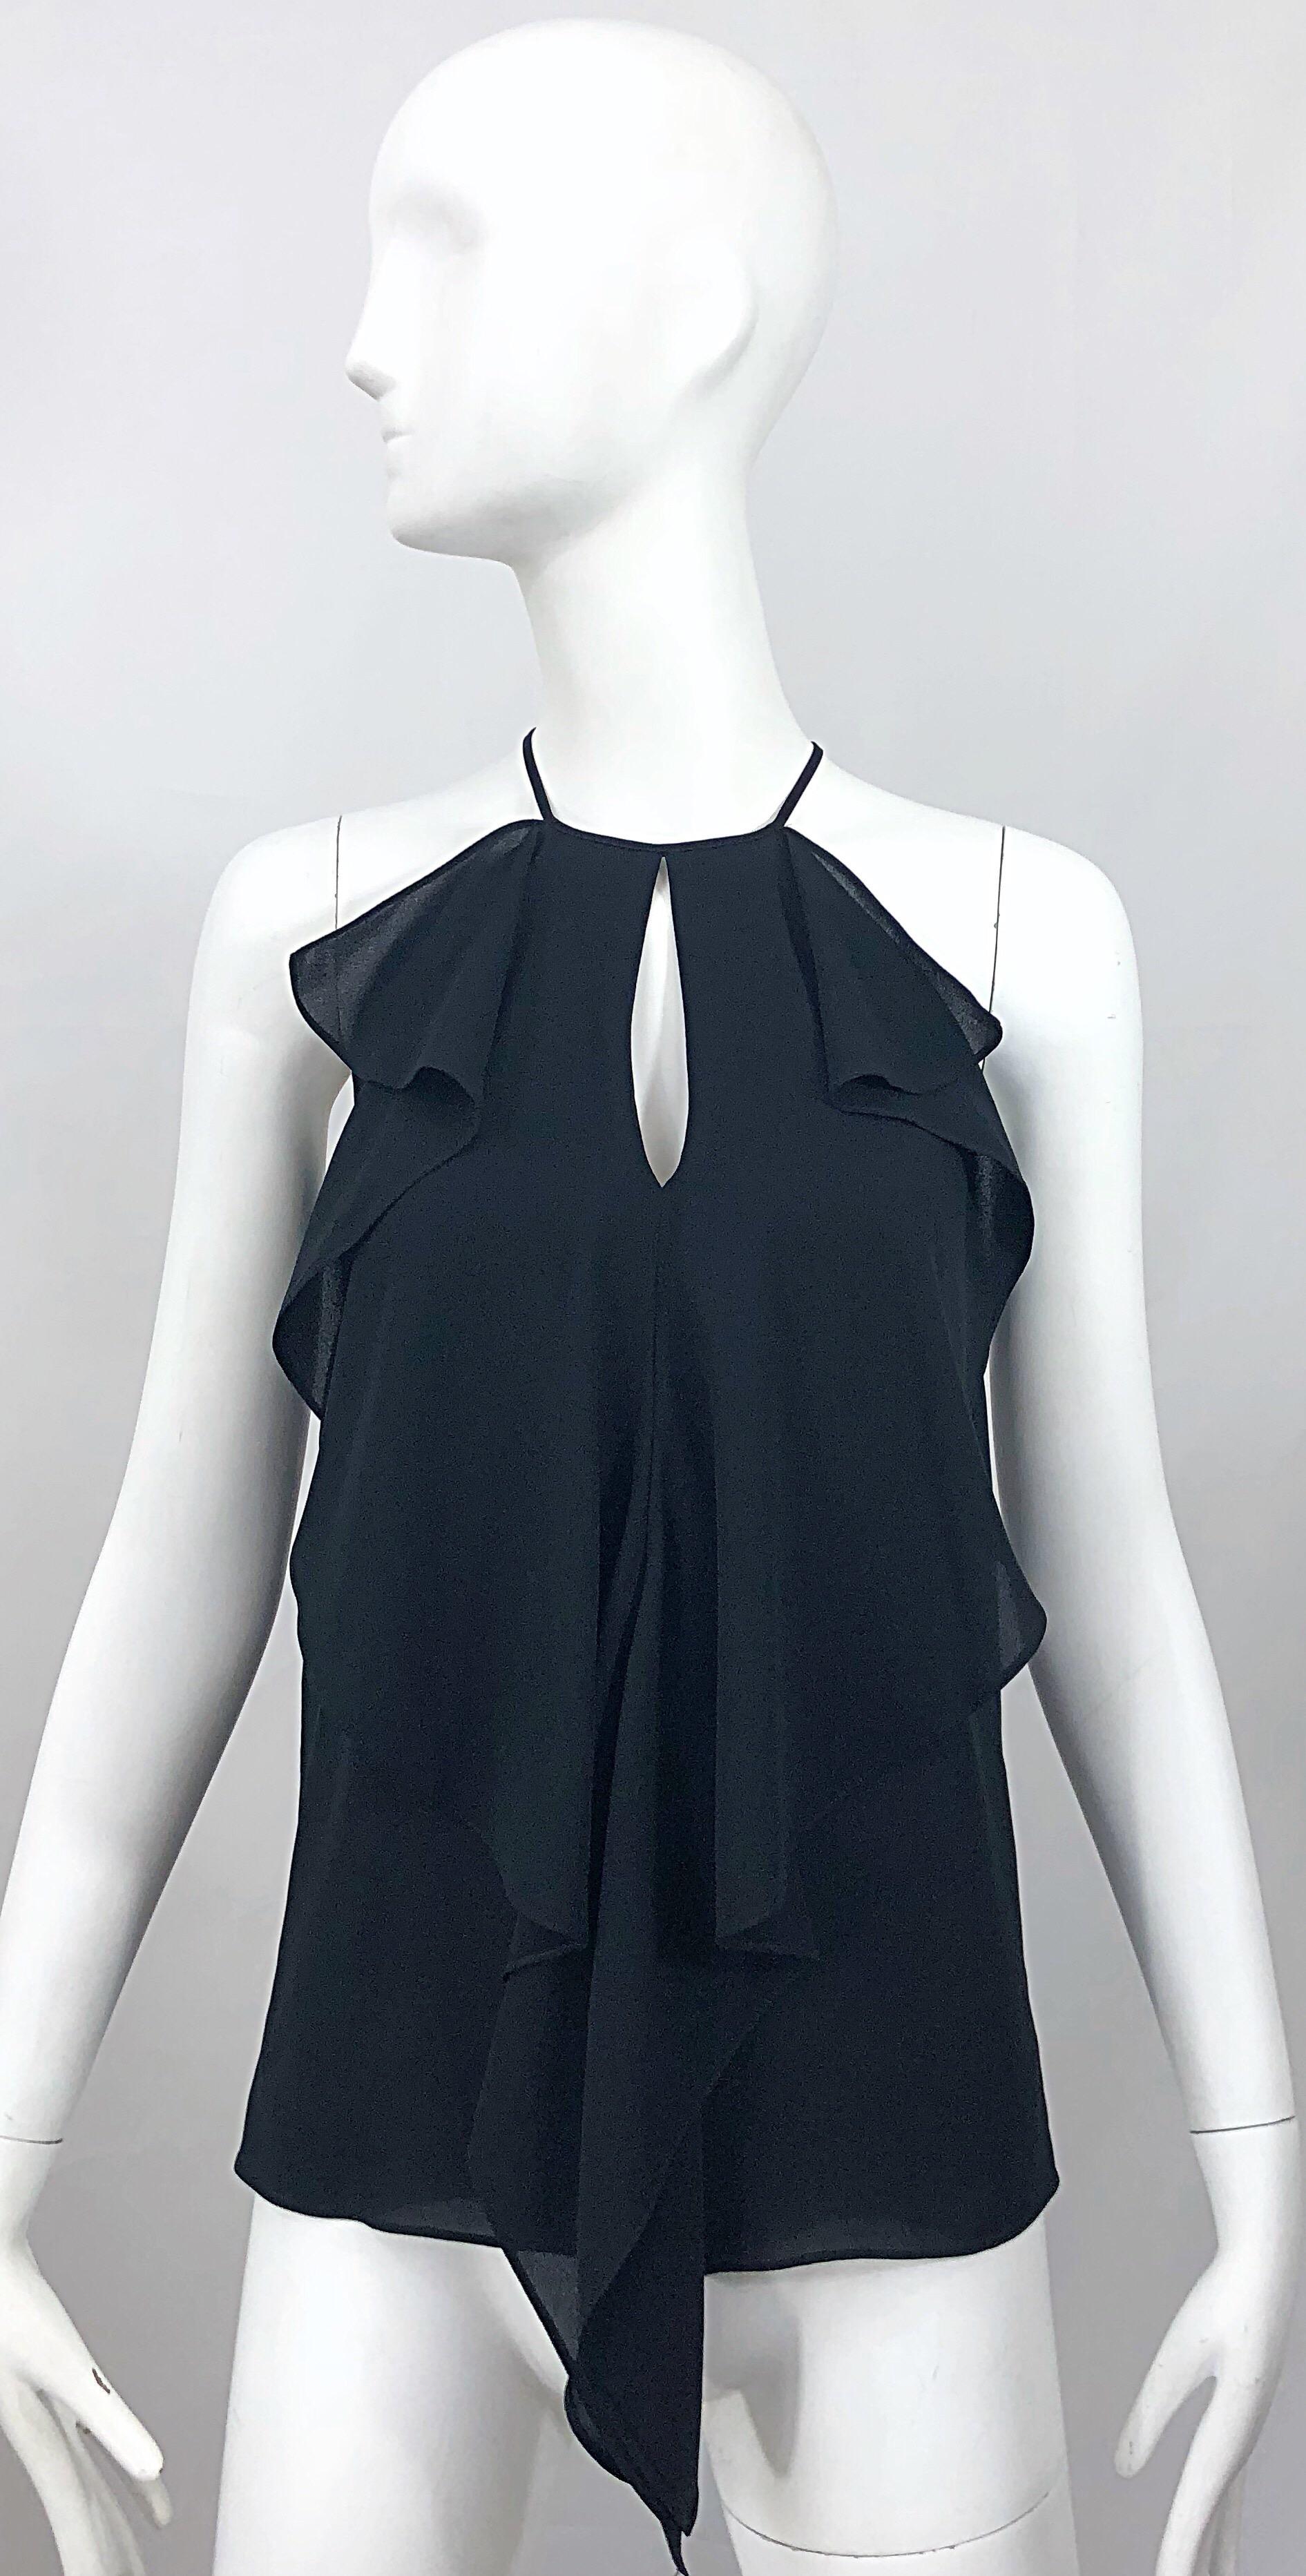 Michael Kors Collection Early 2000s Size 2 / 4 Black Silk Chiffon Sleeveless Top For Sale 6